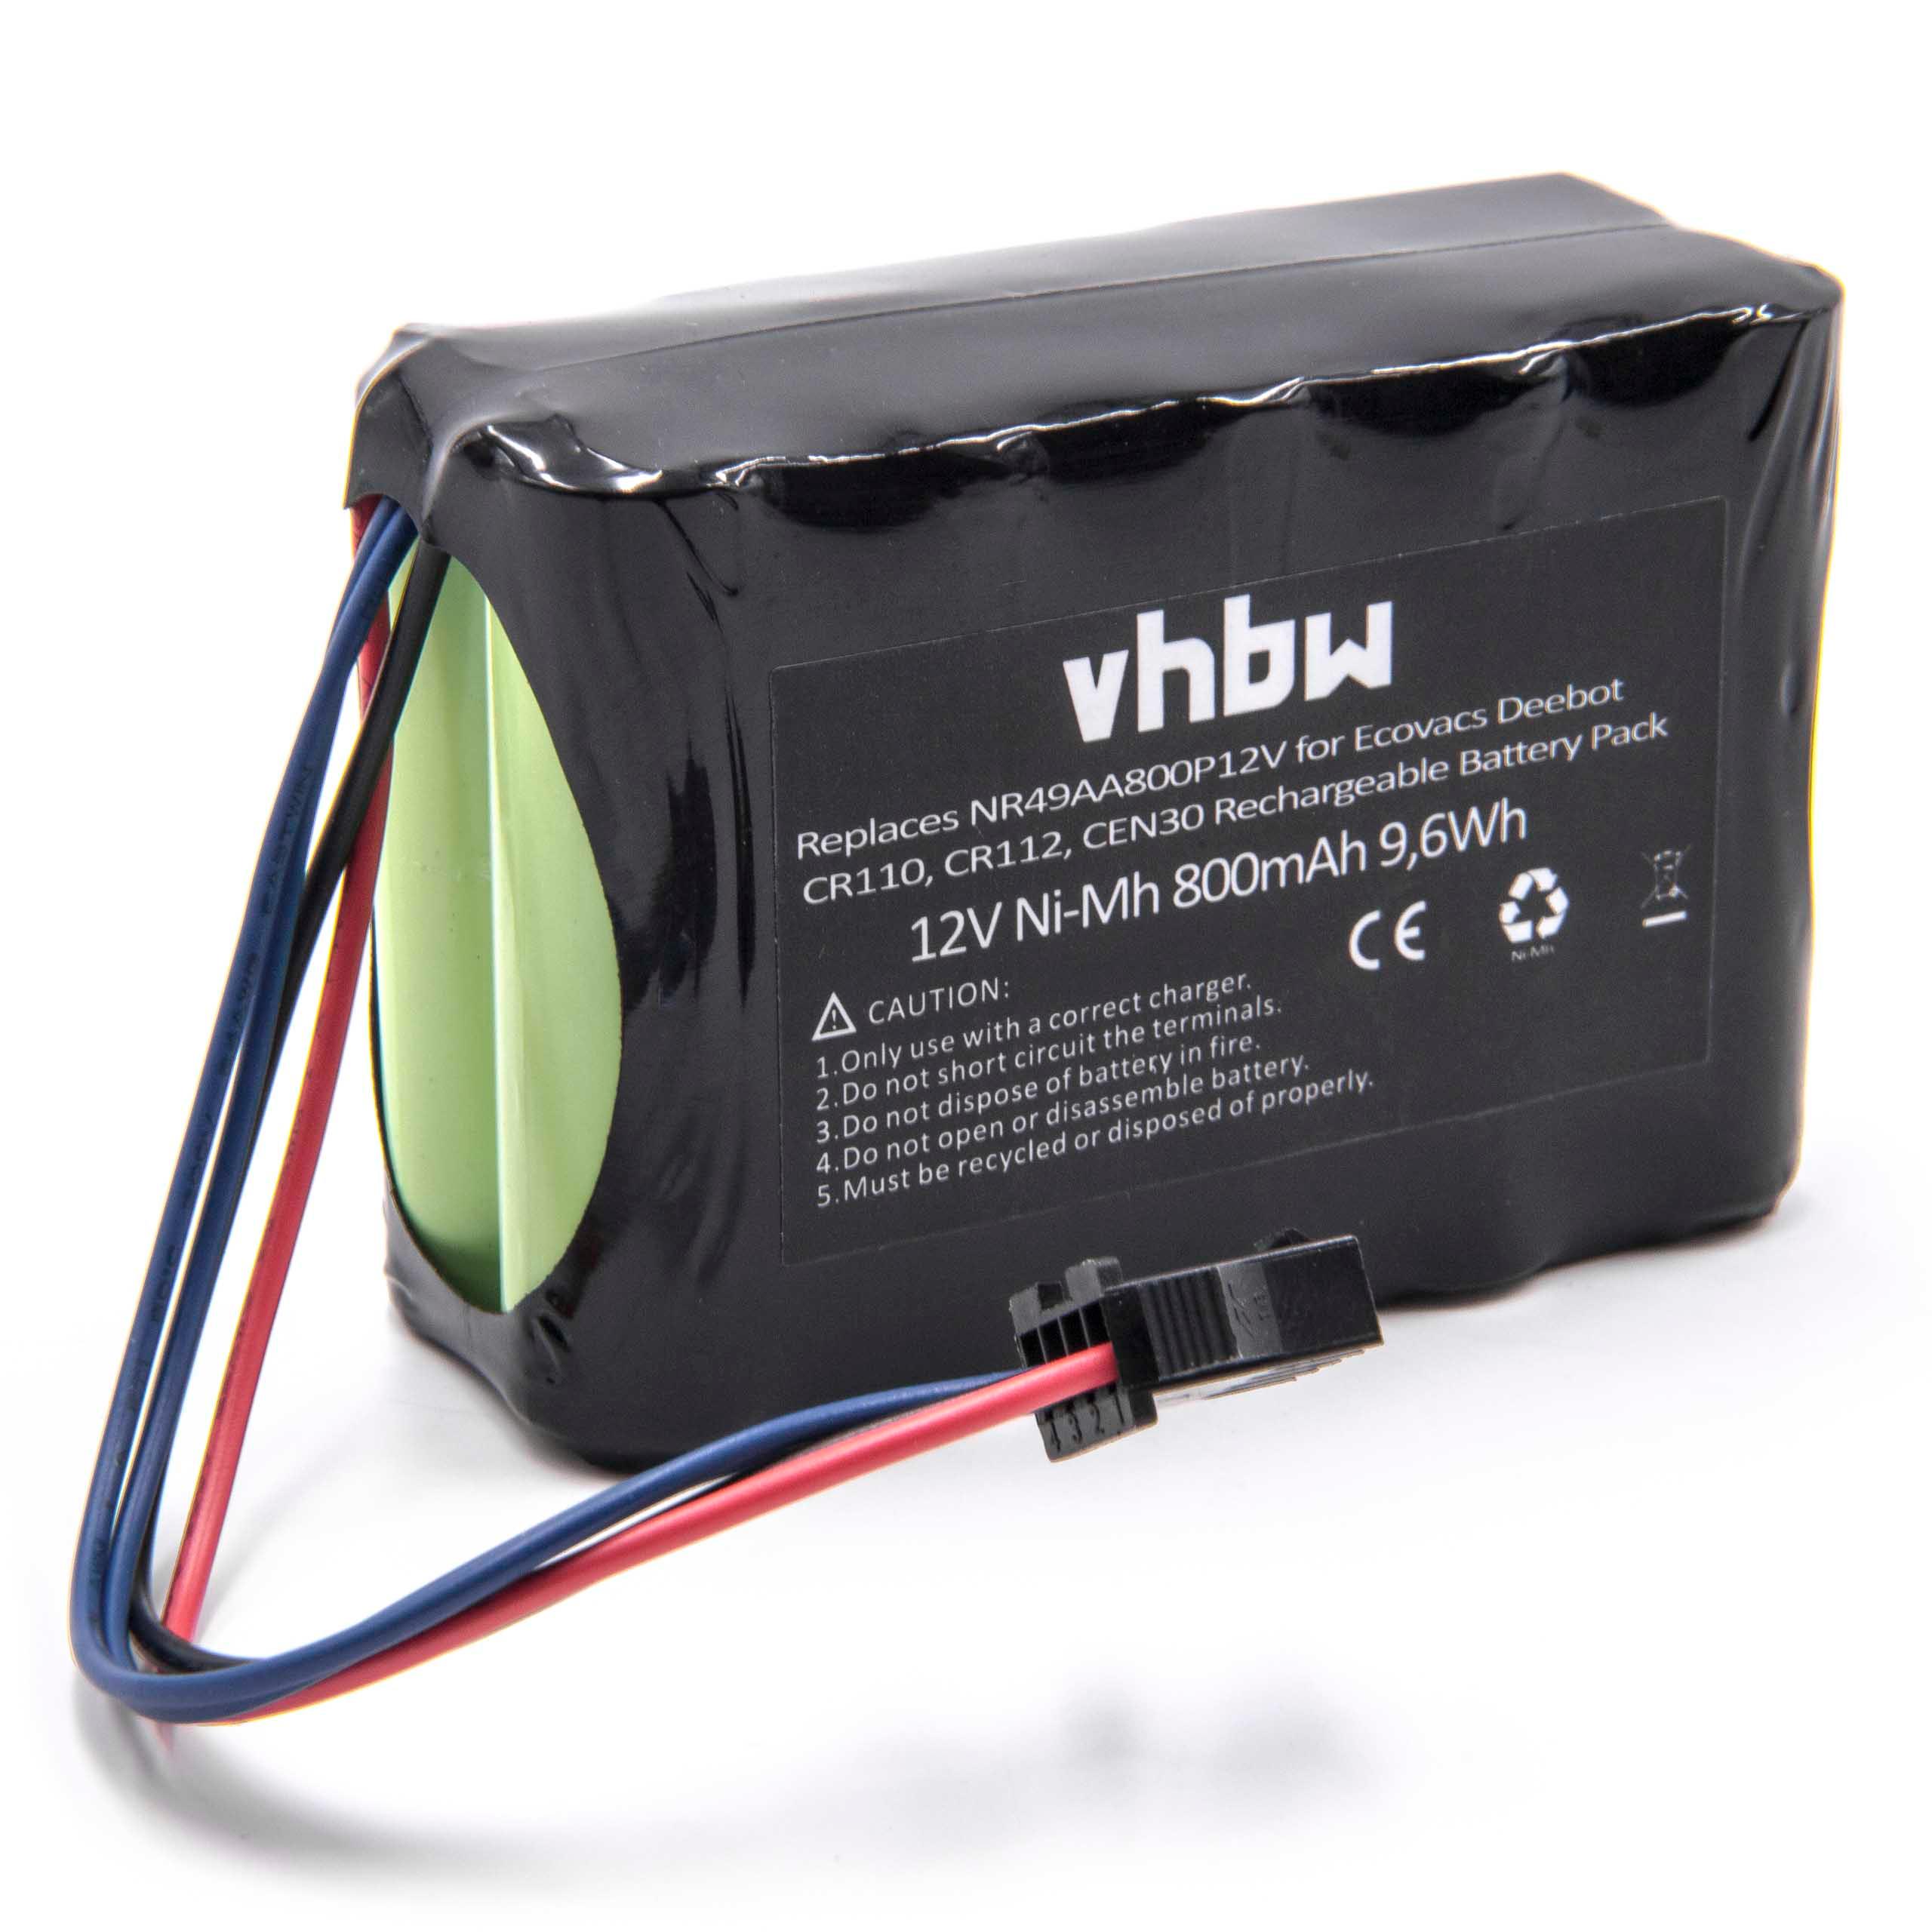 Battery Replacement for AEG NR49AA800P12V for - 800mAh, 12V, NiMH